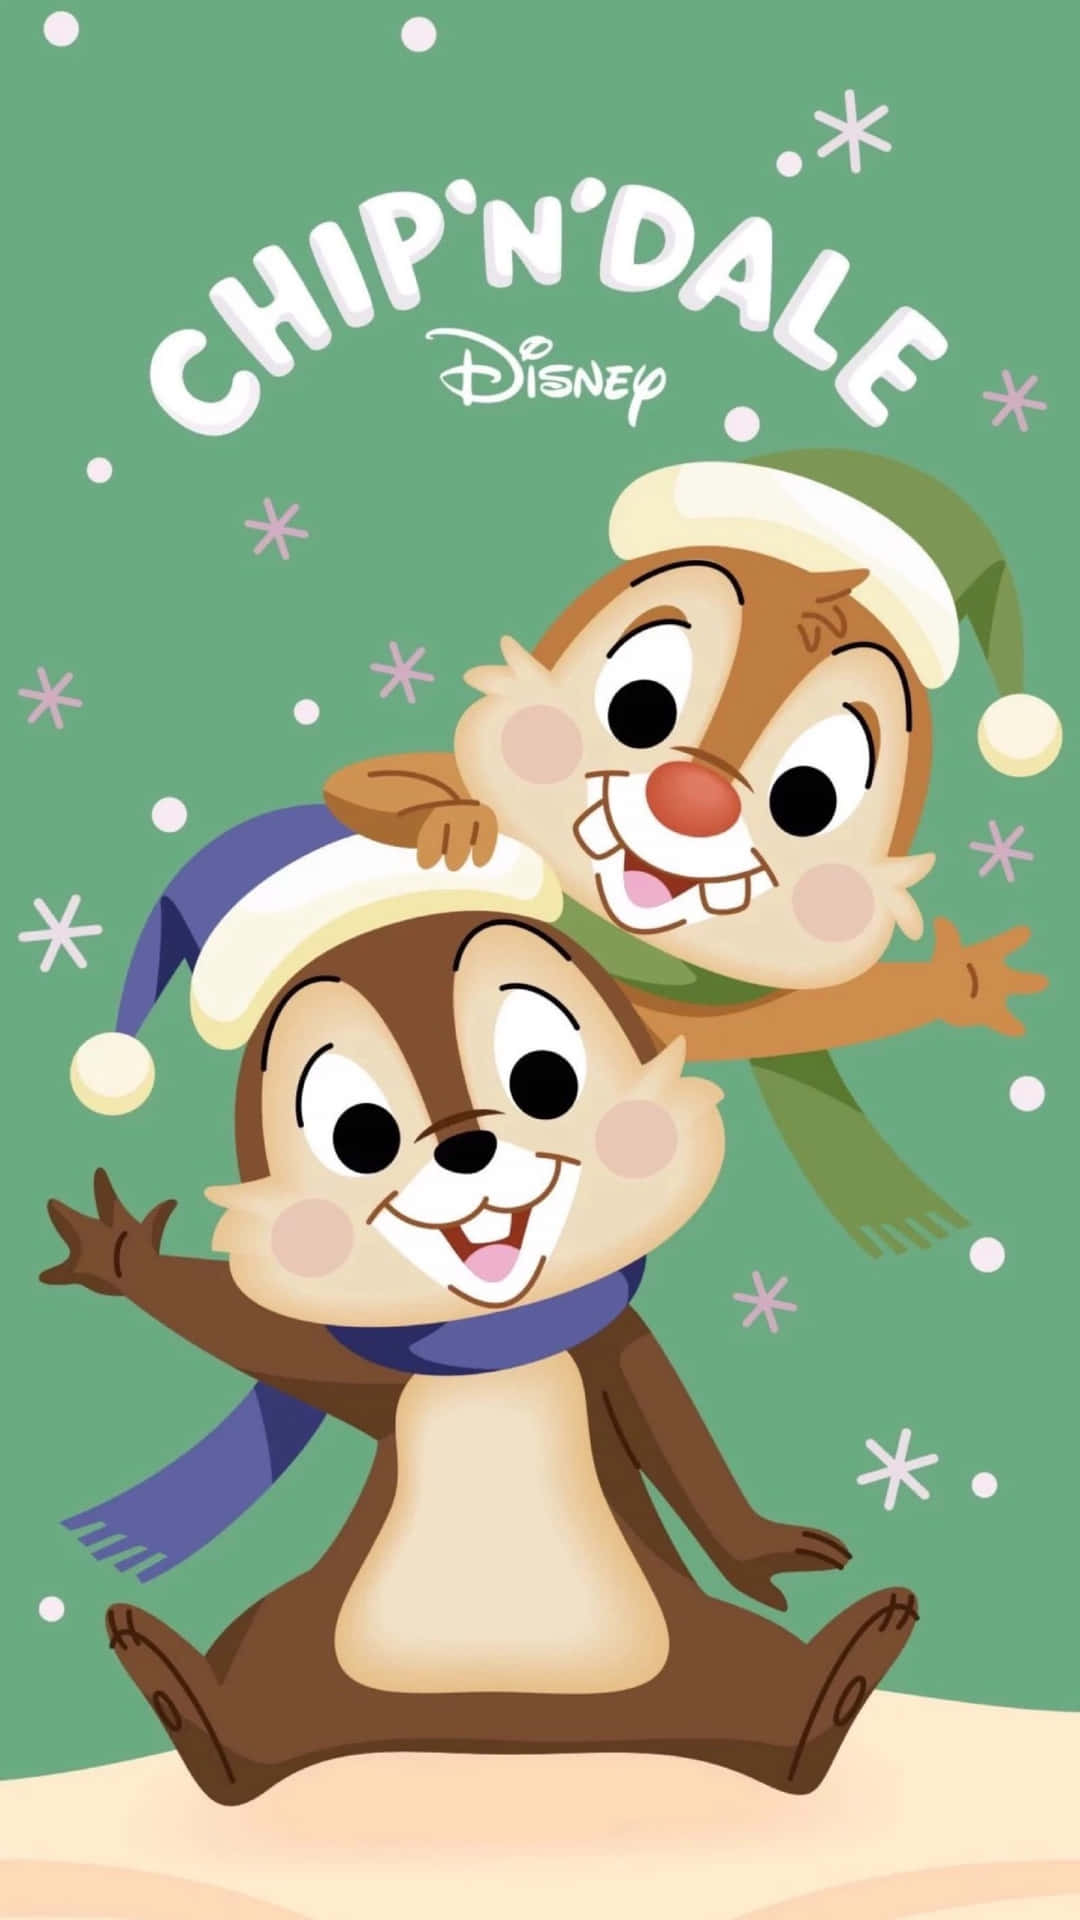 Celebrate Christmas with lovable Disney Characters!